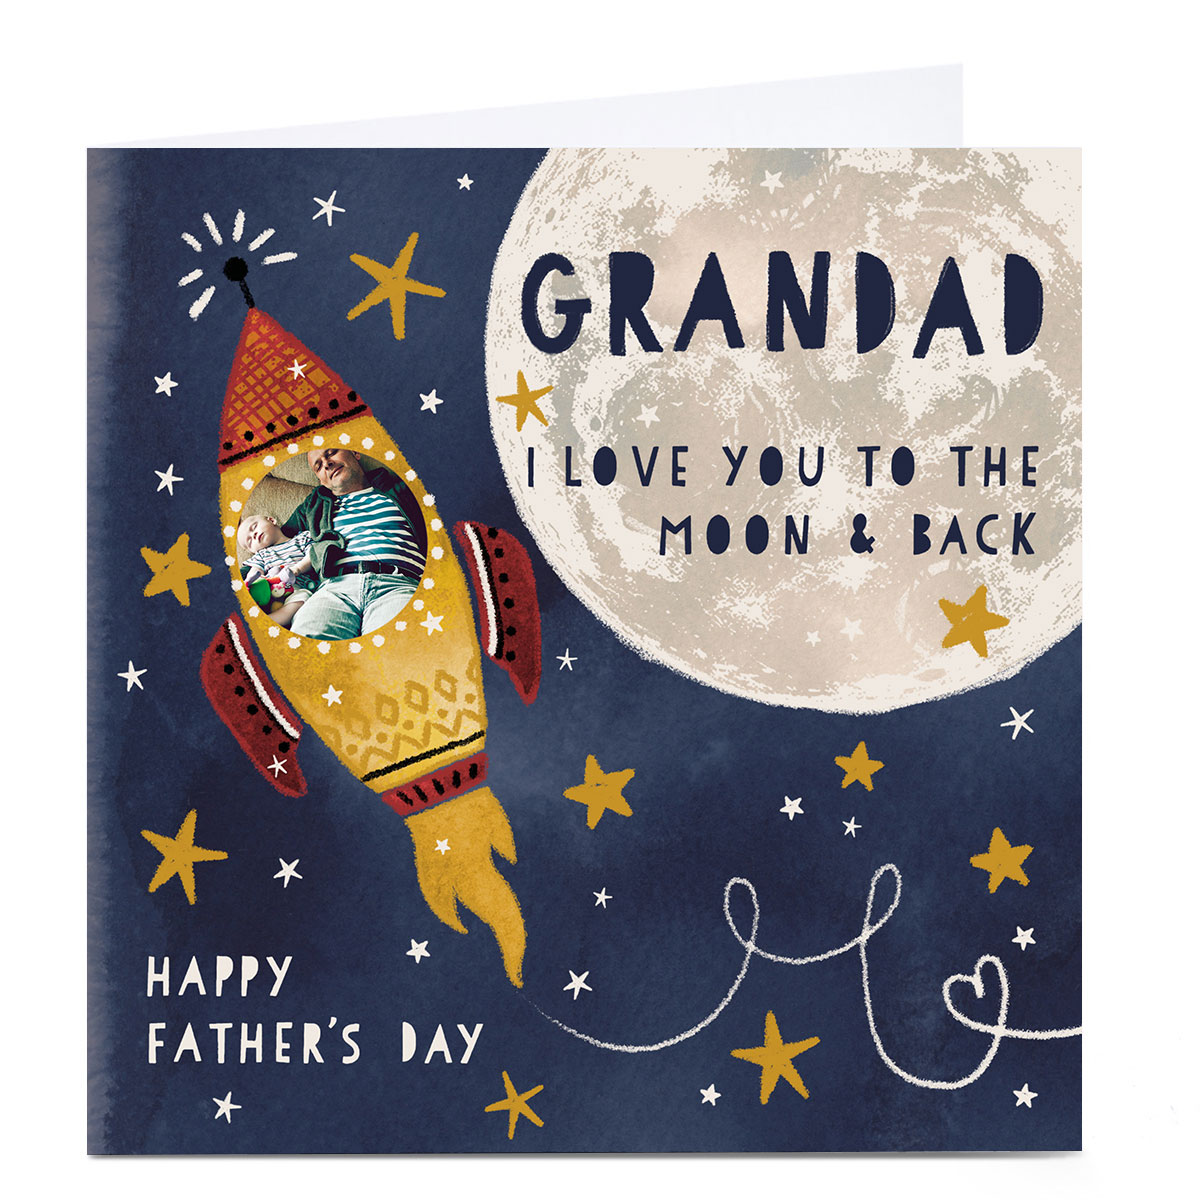 Photo Kerry Spurling Father's Day Card - Grandad Moon & Back